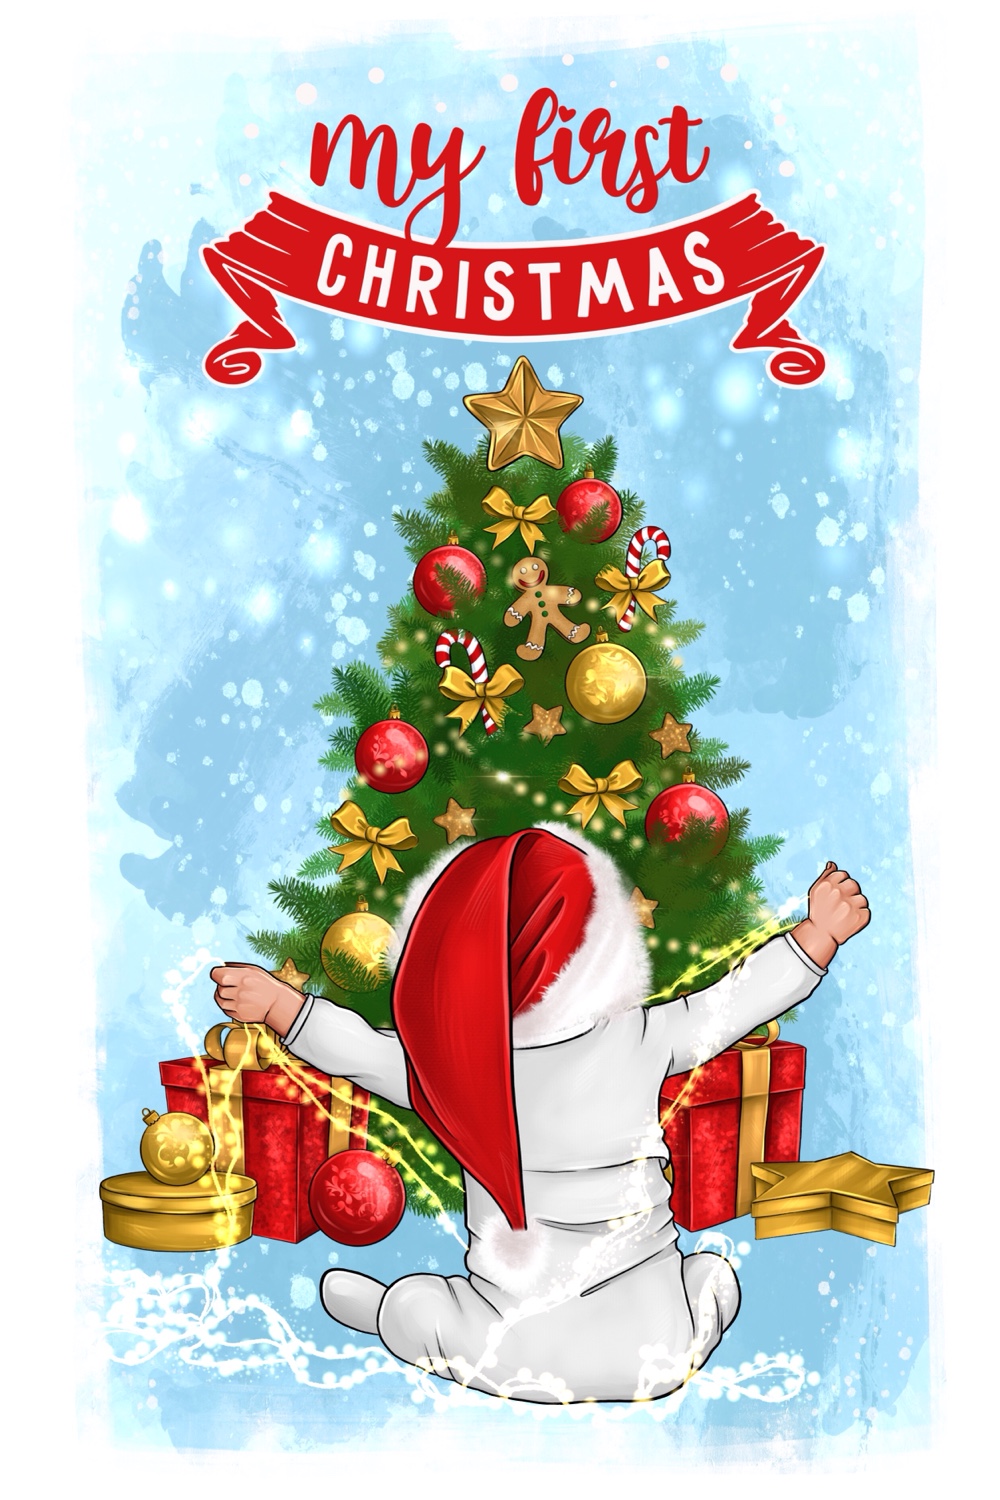 My First Christmas Illustrations Pinterest image.